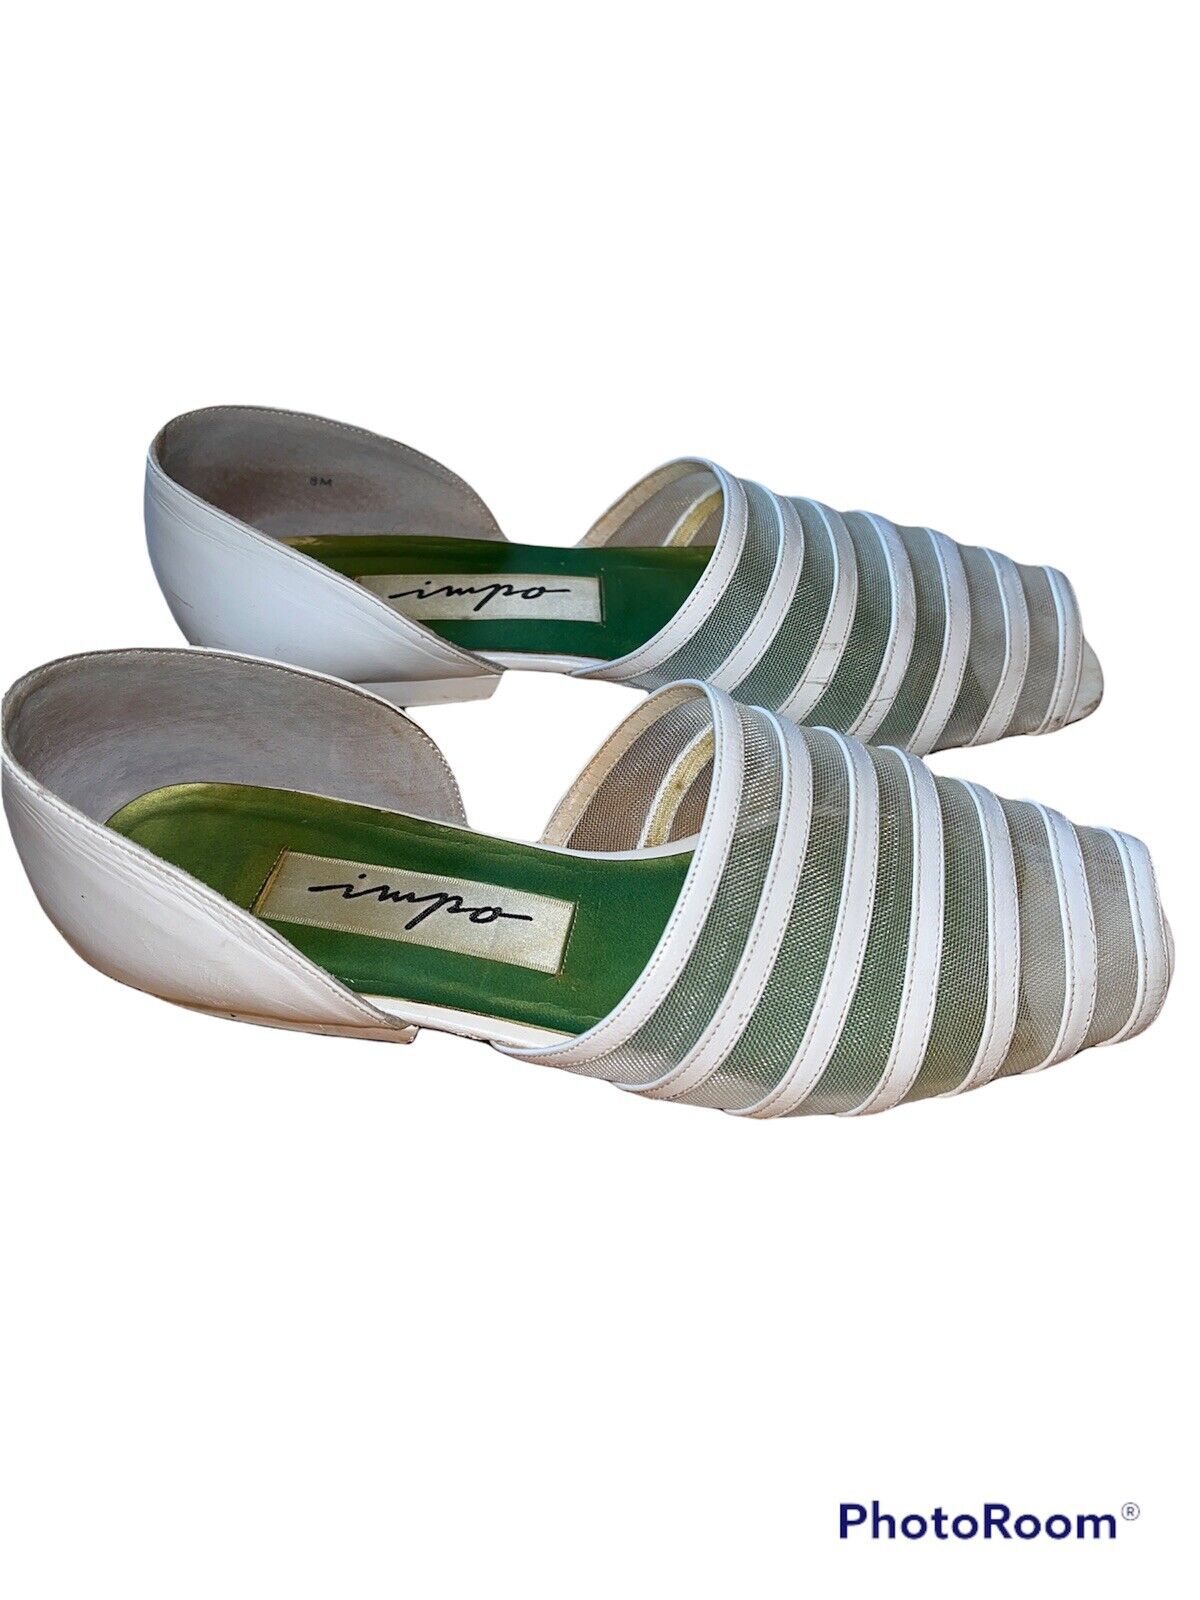 Womens white leather Impo flats - image 4